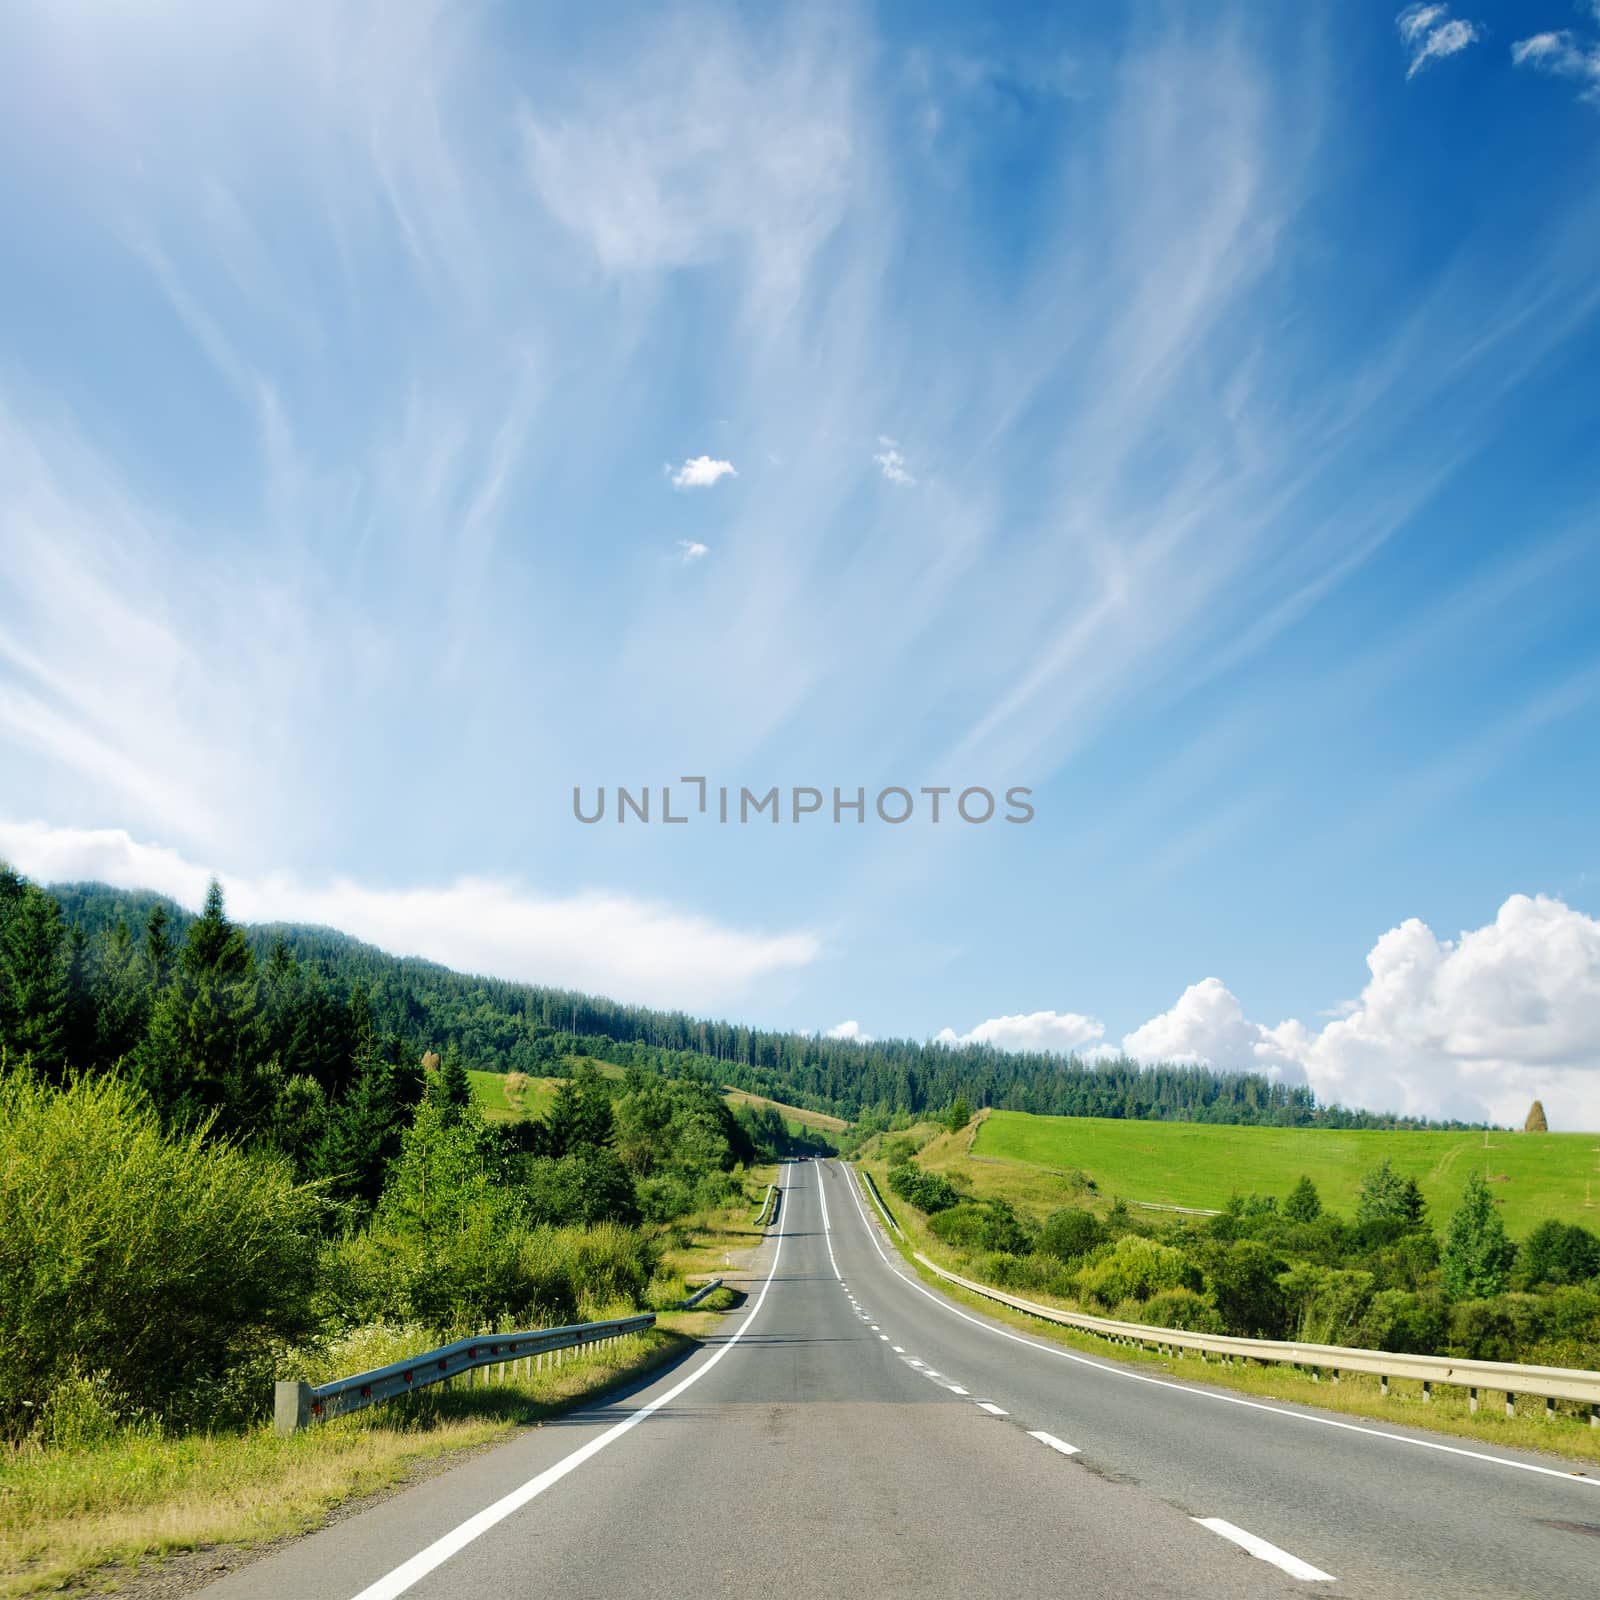 asphalt road to horizon in mountain and blue sky